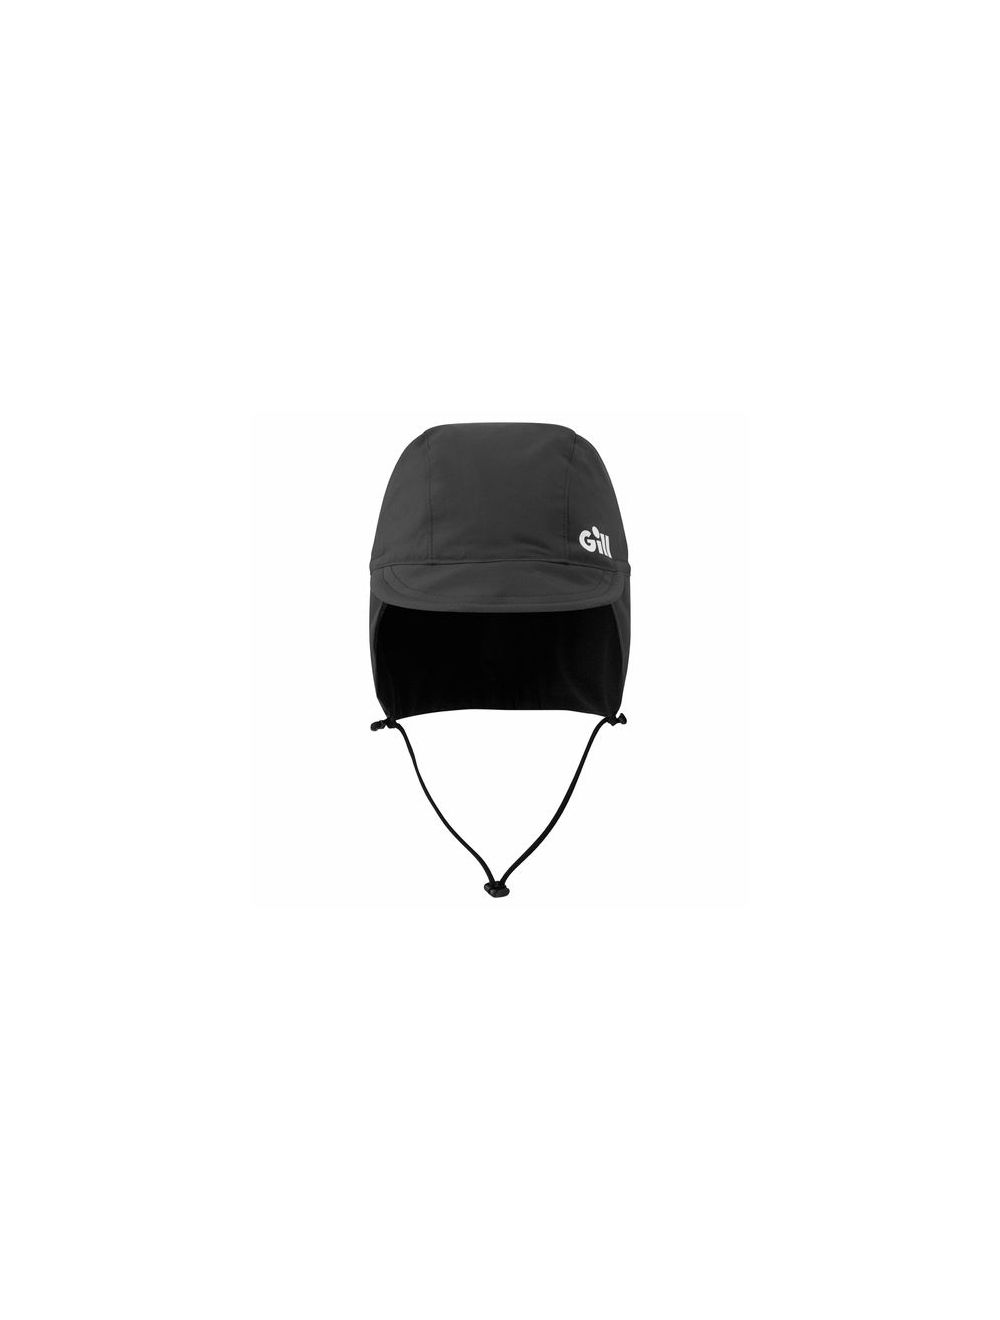 Gill Offshore Hat